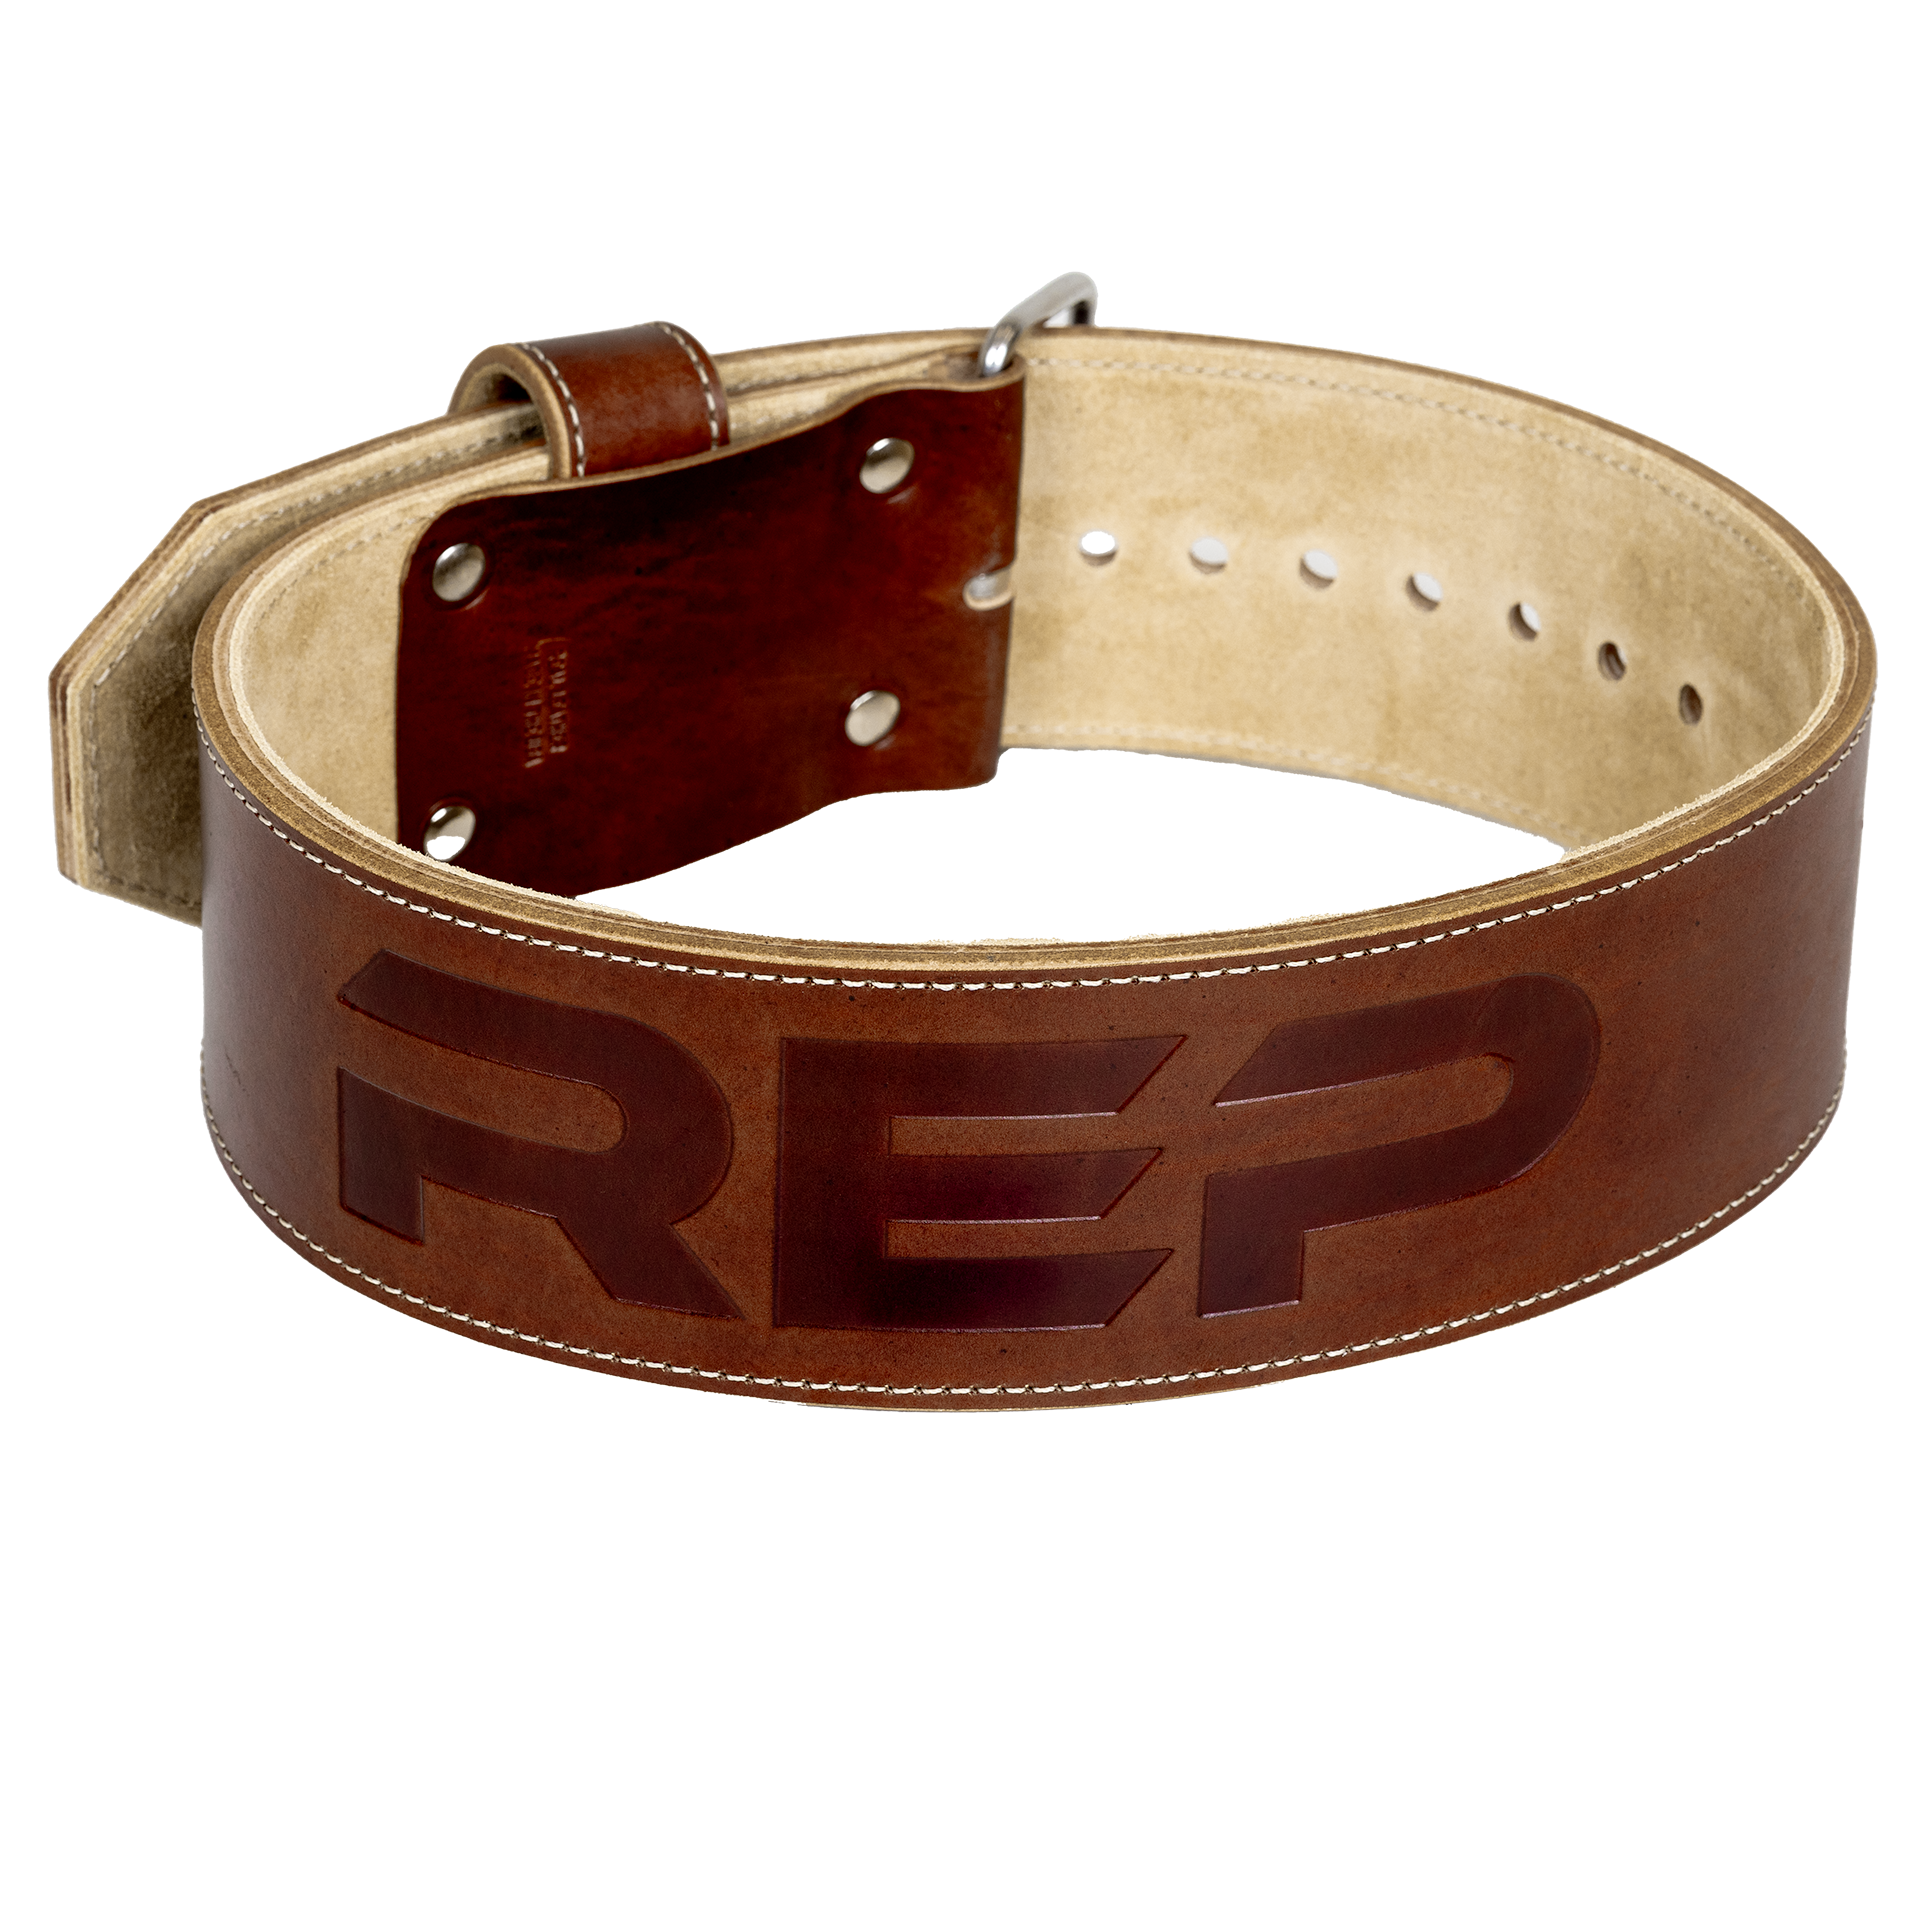 REP Premium Leather Lifting Belt | Weightlifting